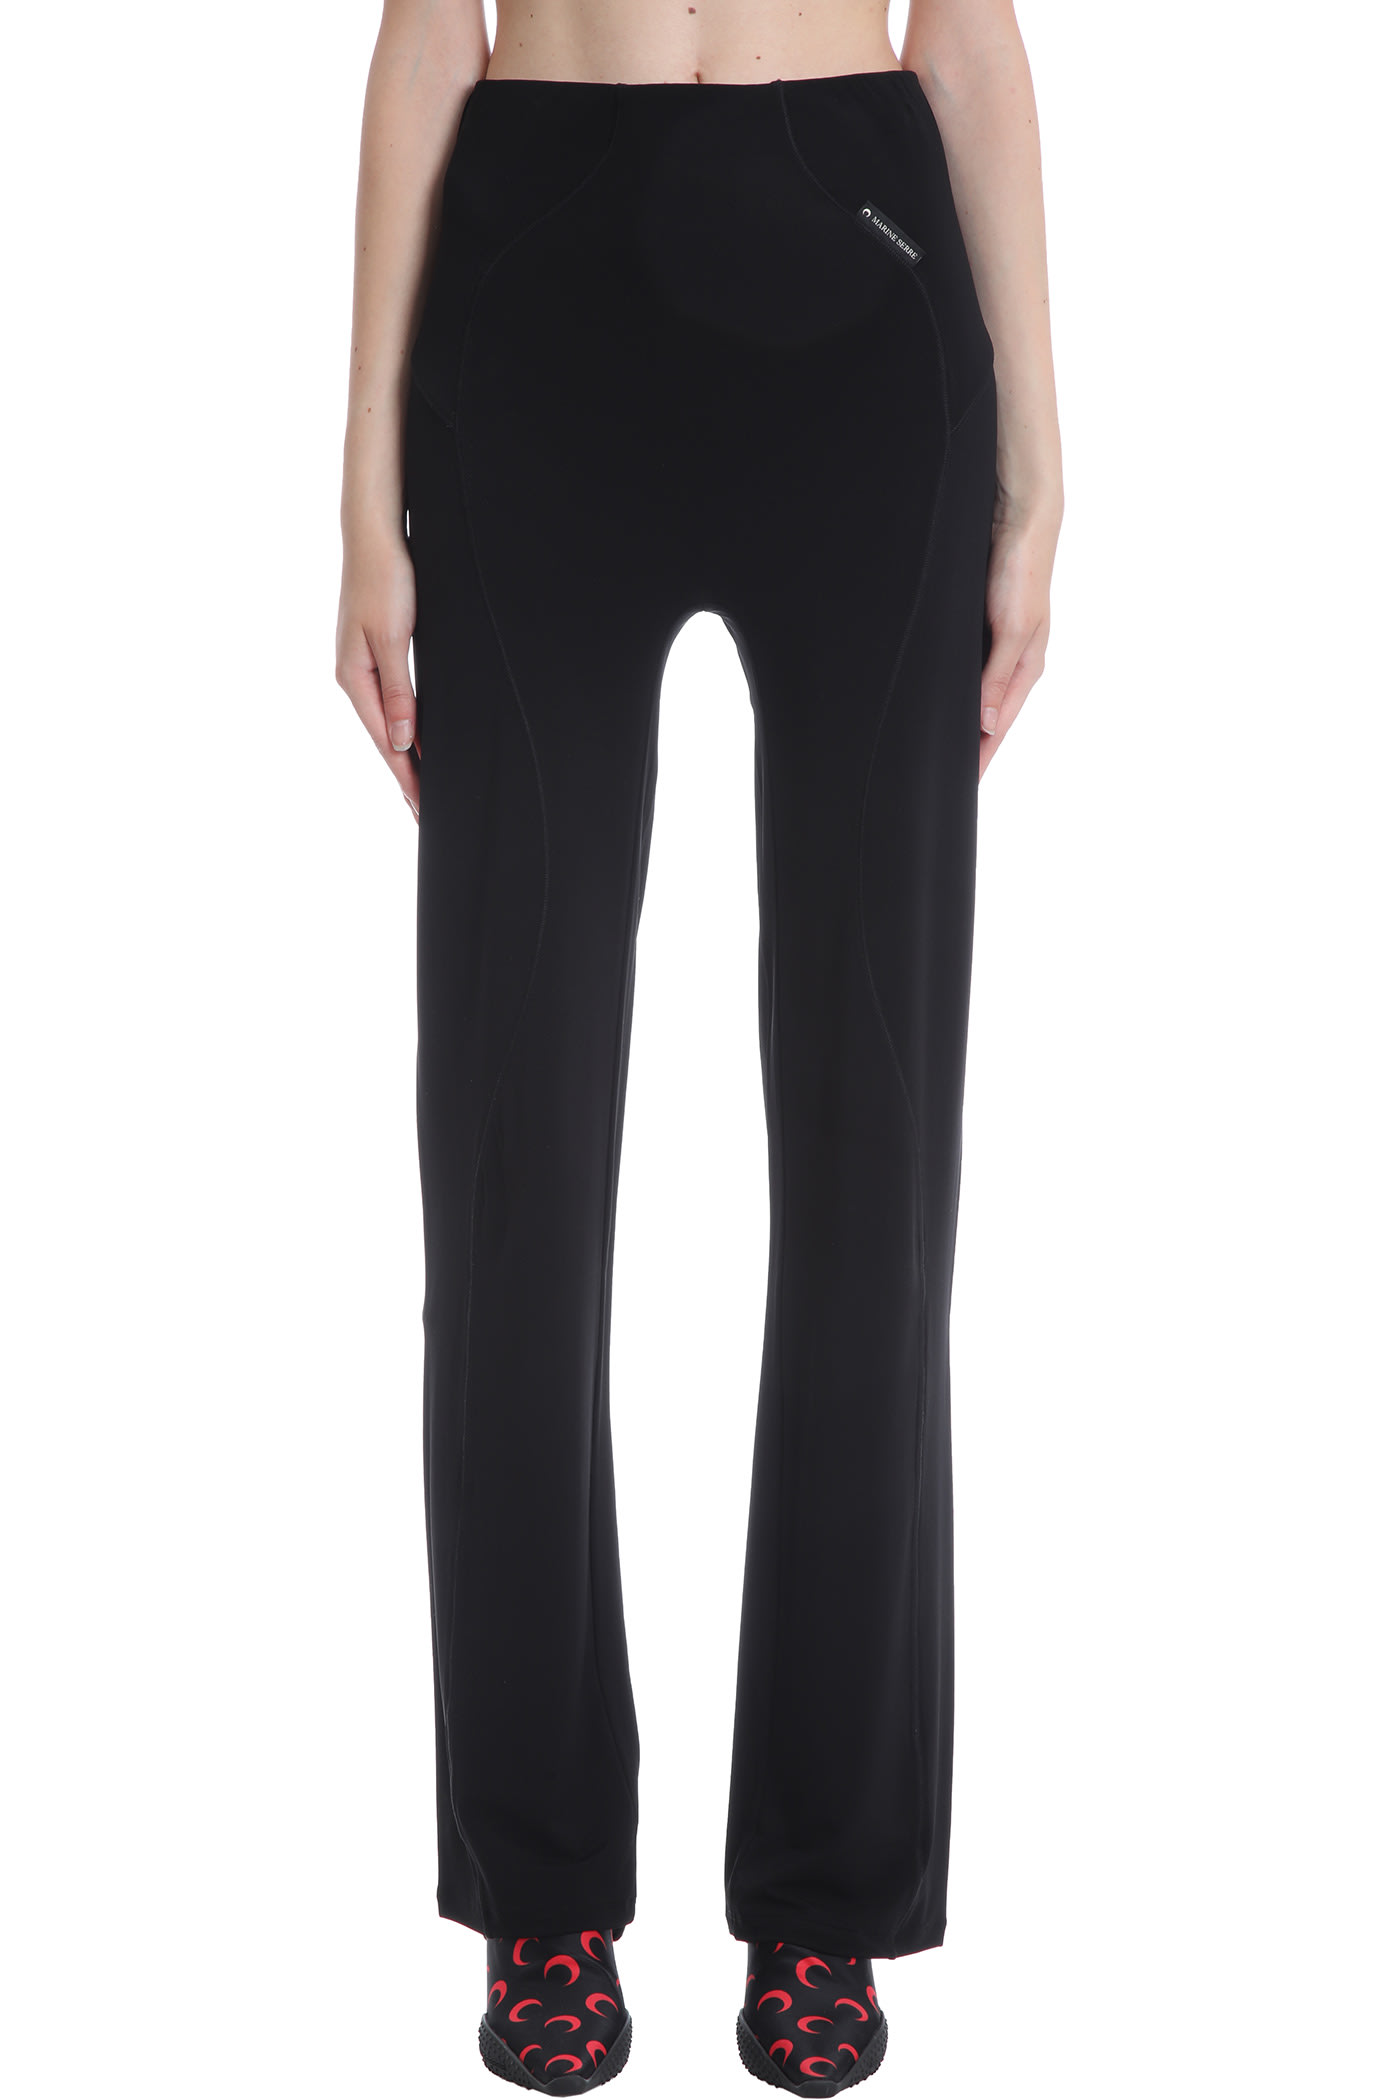 Marine Serre Tribal Fitted Pants In Black Viscose